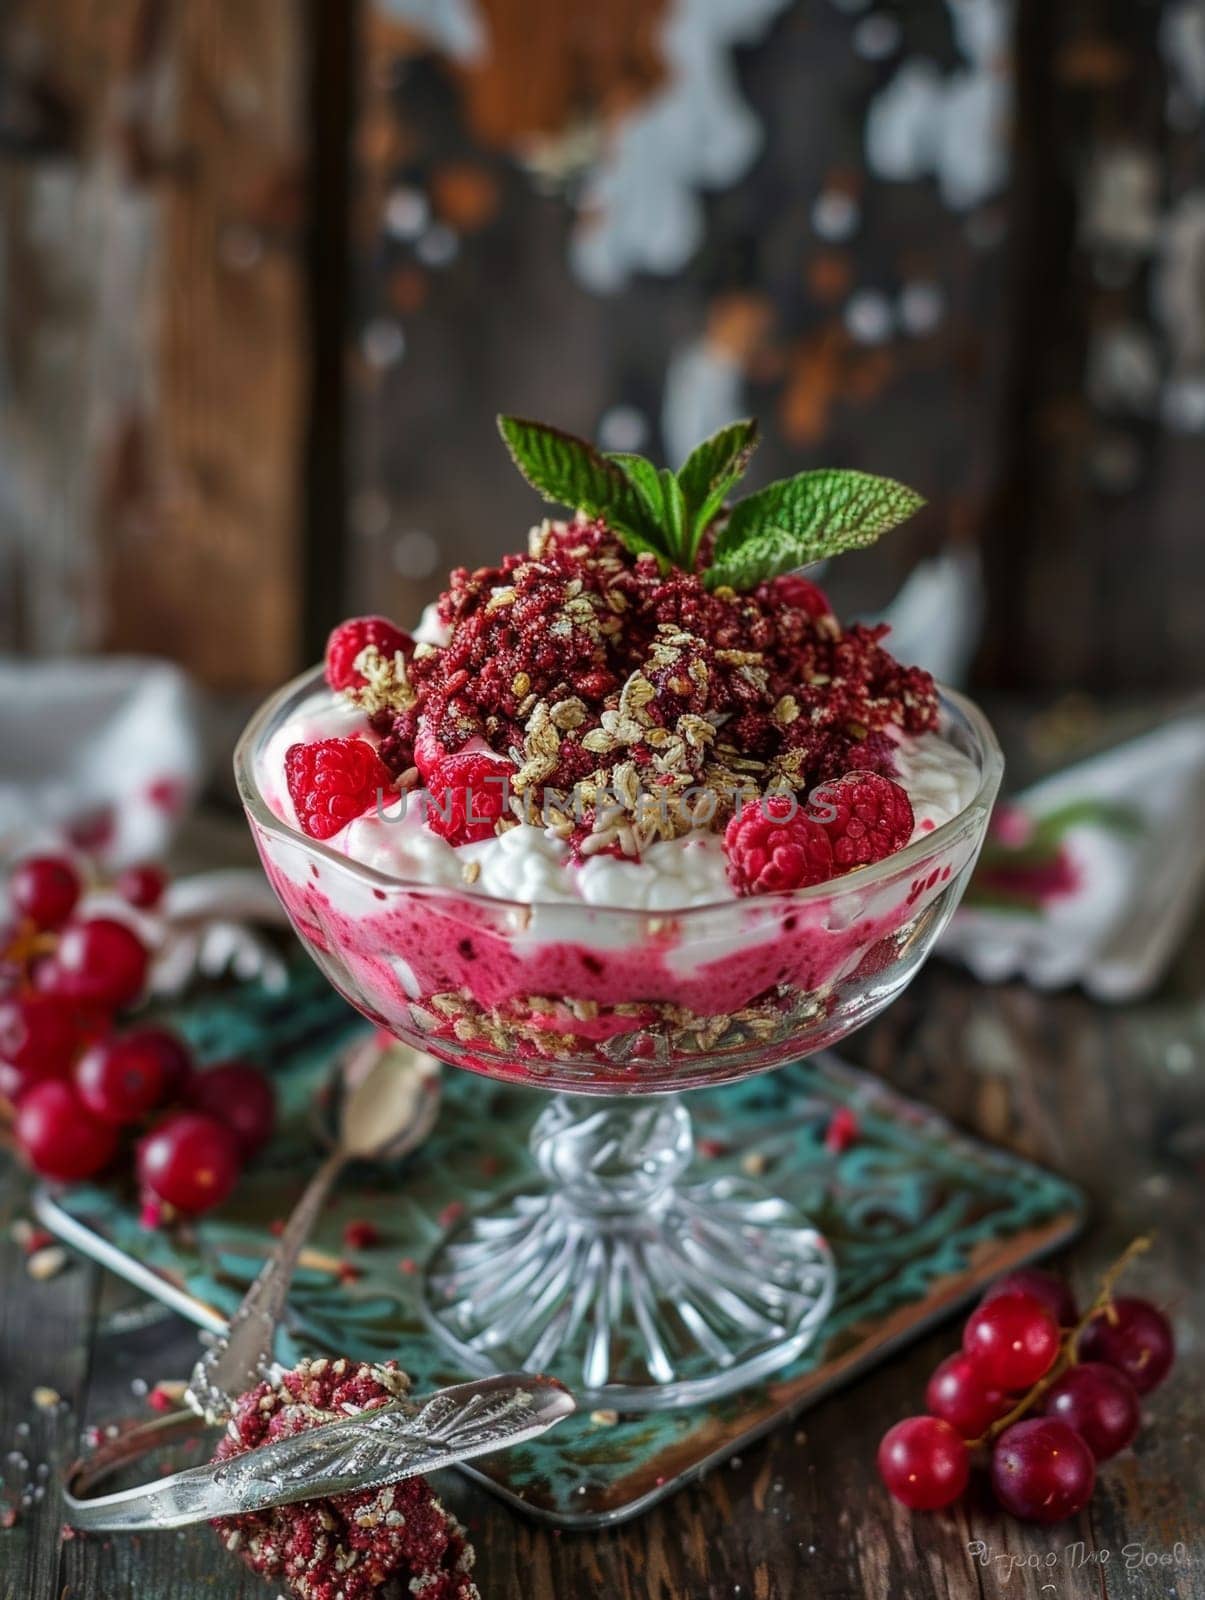 Estonian kama, a traditional mixture of ground grains, served with fresh yogurt and berries in a simple glass bowl. This wholesome, nutritious dish represents the cultural heritage. by sfinks